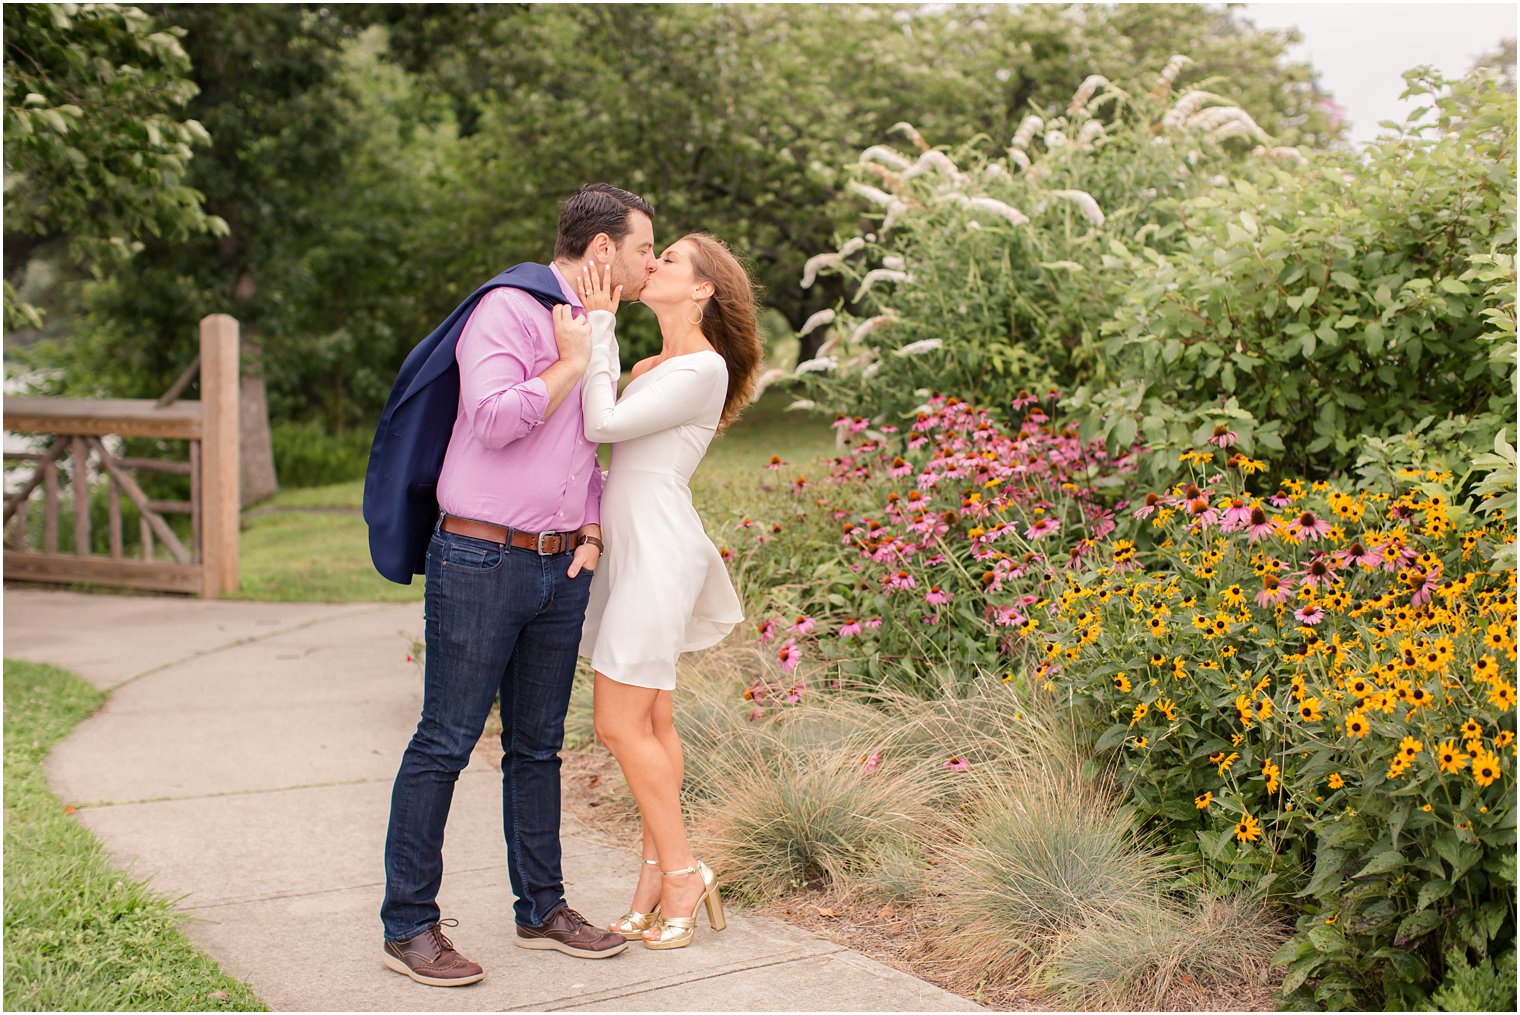 kiss by the flowers in the summer photographed by Idalia Photography during Spring Lake NJ engagement session